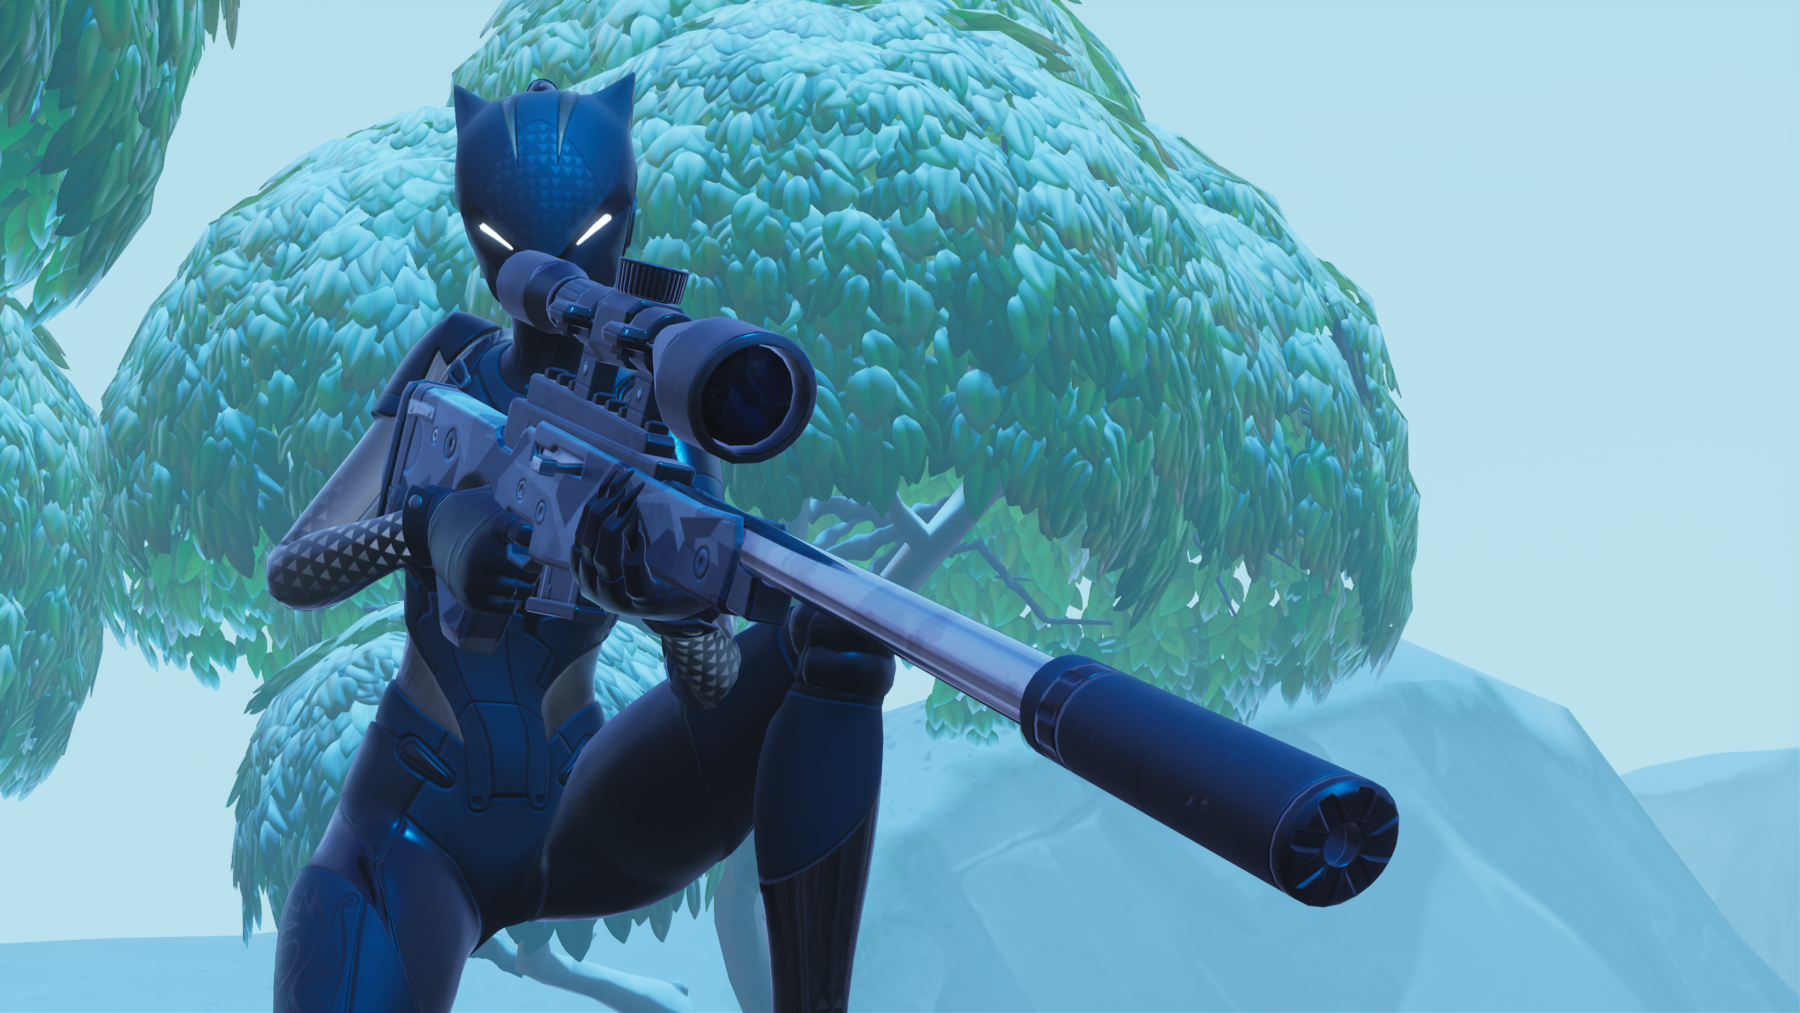 Video Game Fortnite HD Static Wallpaper Collection | YL ... - 1800 x 1013 png 2206kB